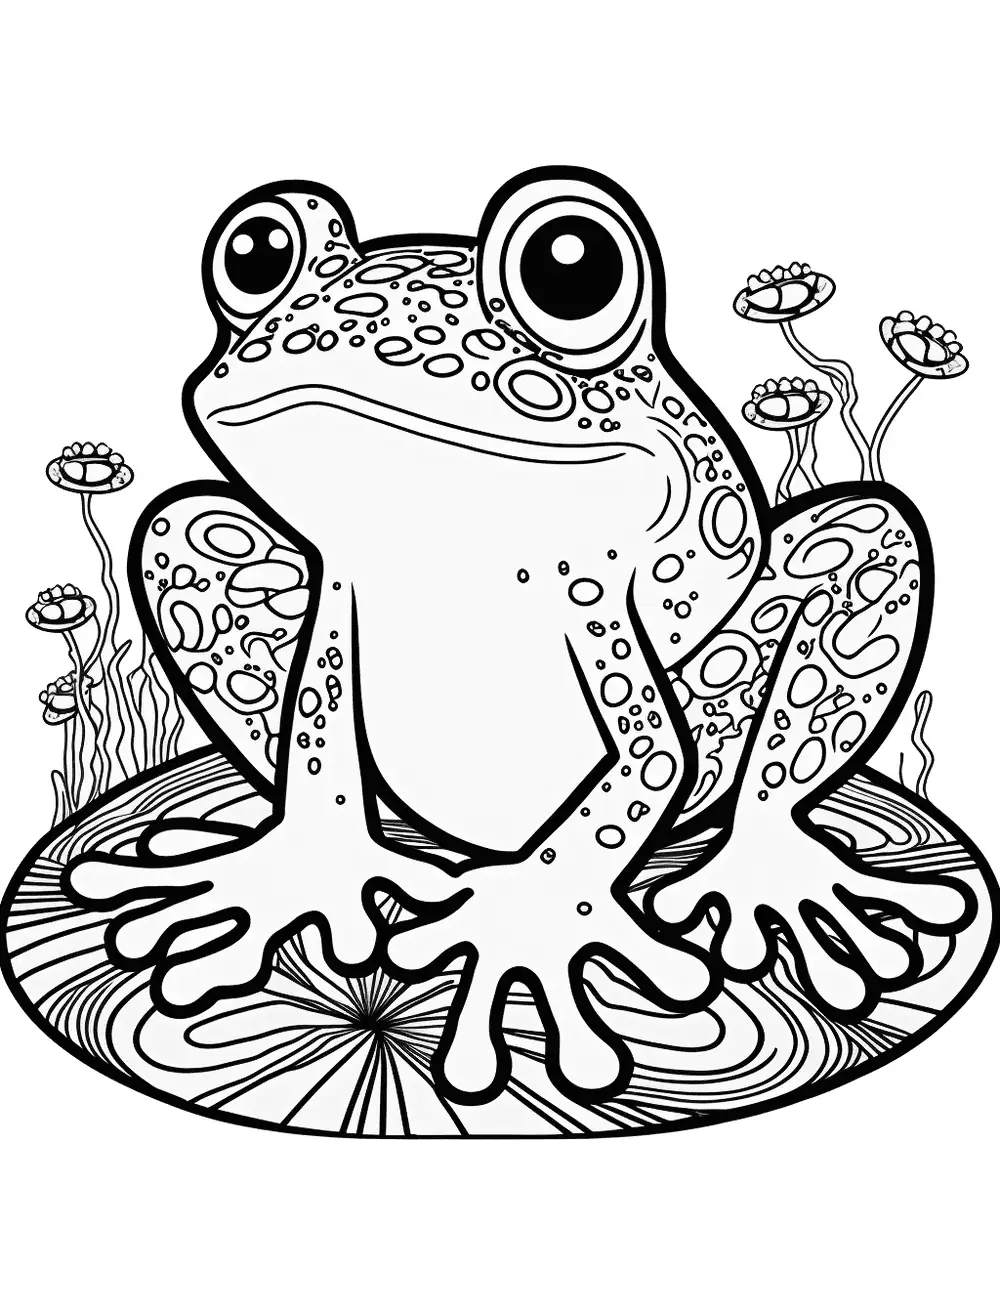 Trippy Frog Coloring Page - A trippy, psychedelic-style frog with bright colors and abstract shapes.